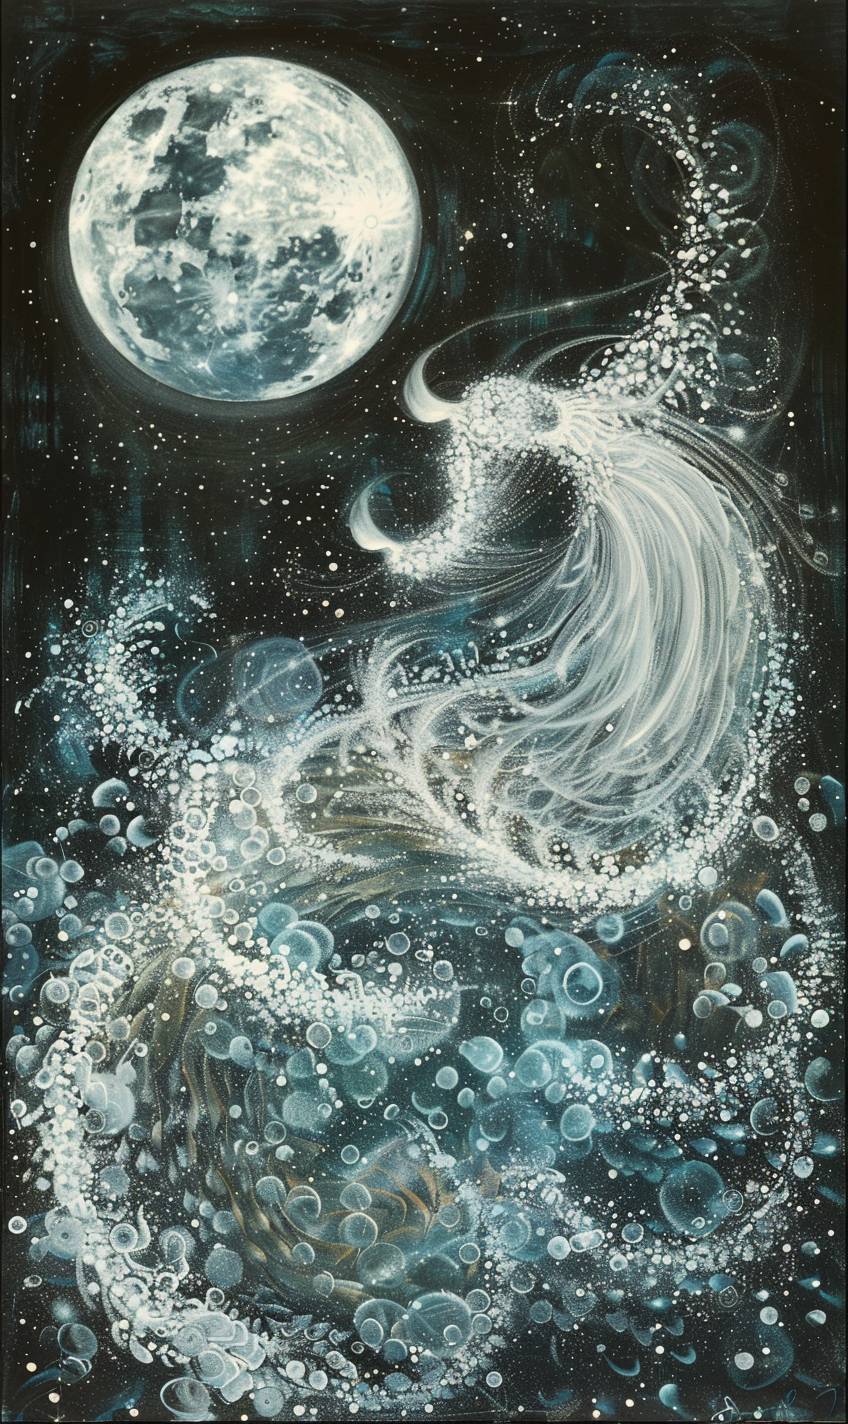 In the style of Barbara Takenaga, ethereal beings dancing under the moonlight